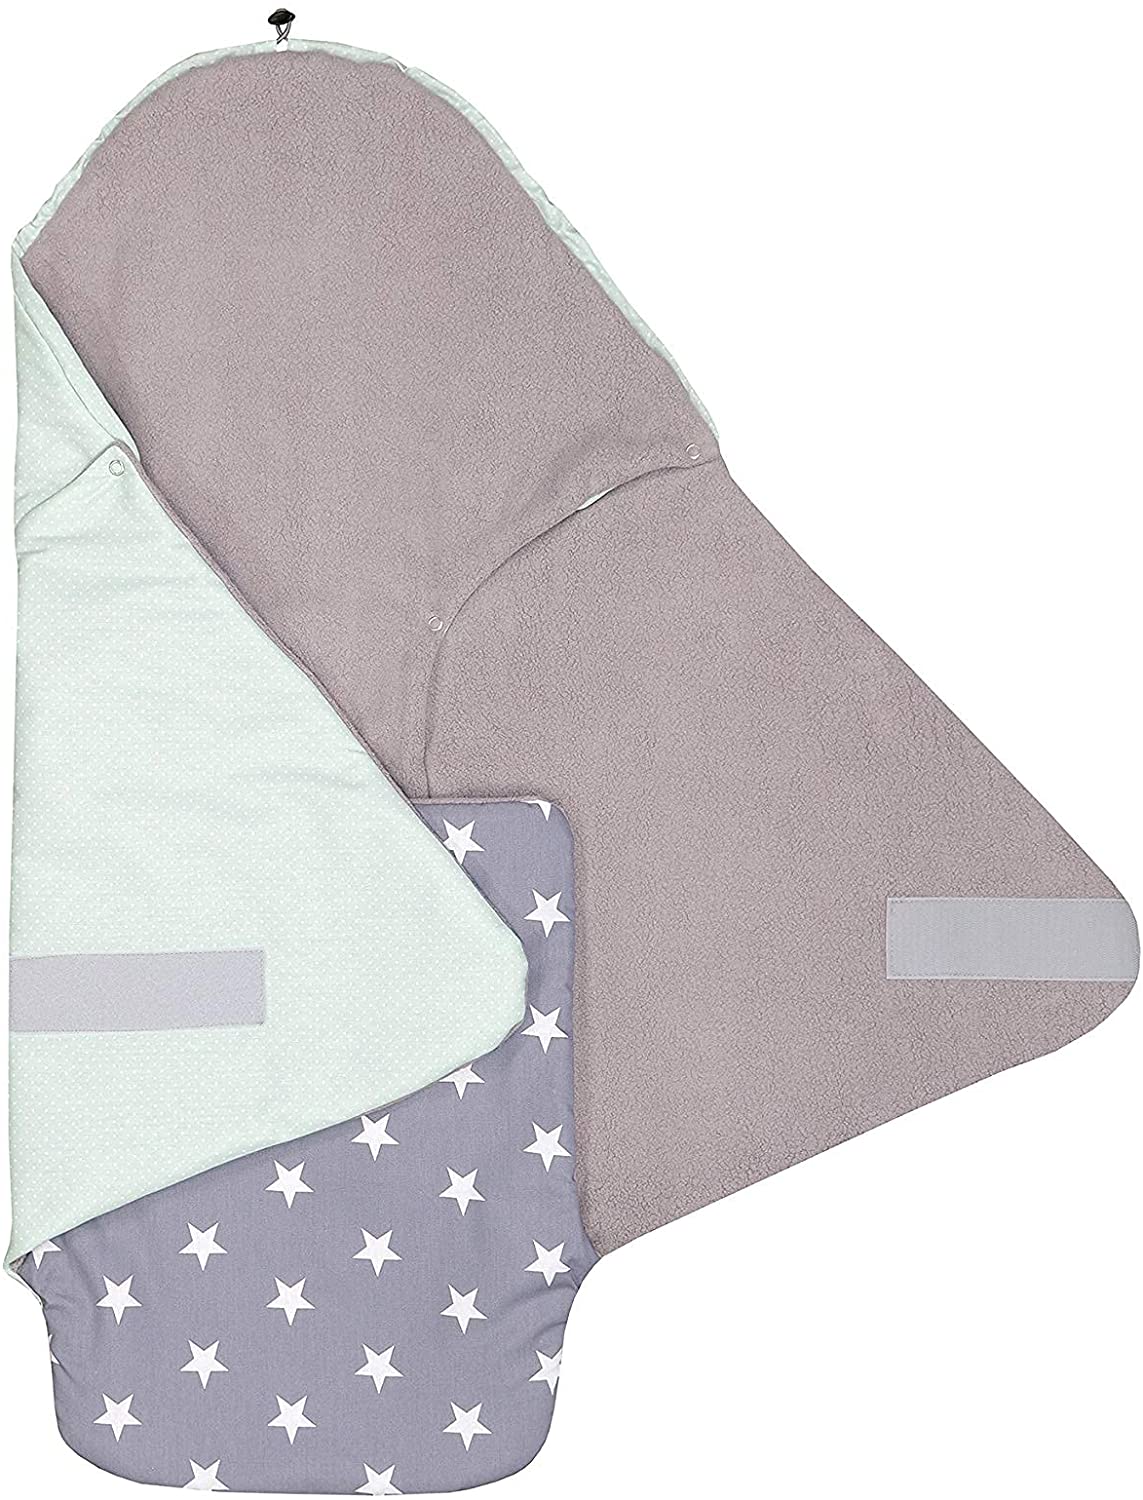 ULLENBOOM ® Swaddling Blanket Baby Seat Mint Grey (Made in EU) - Baby Blanket for Car Seat (e.g. Maxi Cosi®), baby bath or pram, ideal blanket for babies (0 to 9 months)